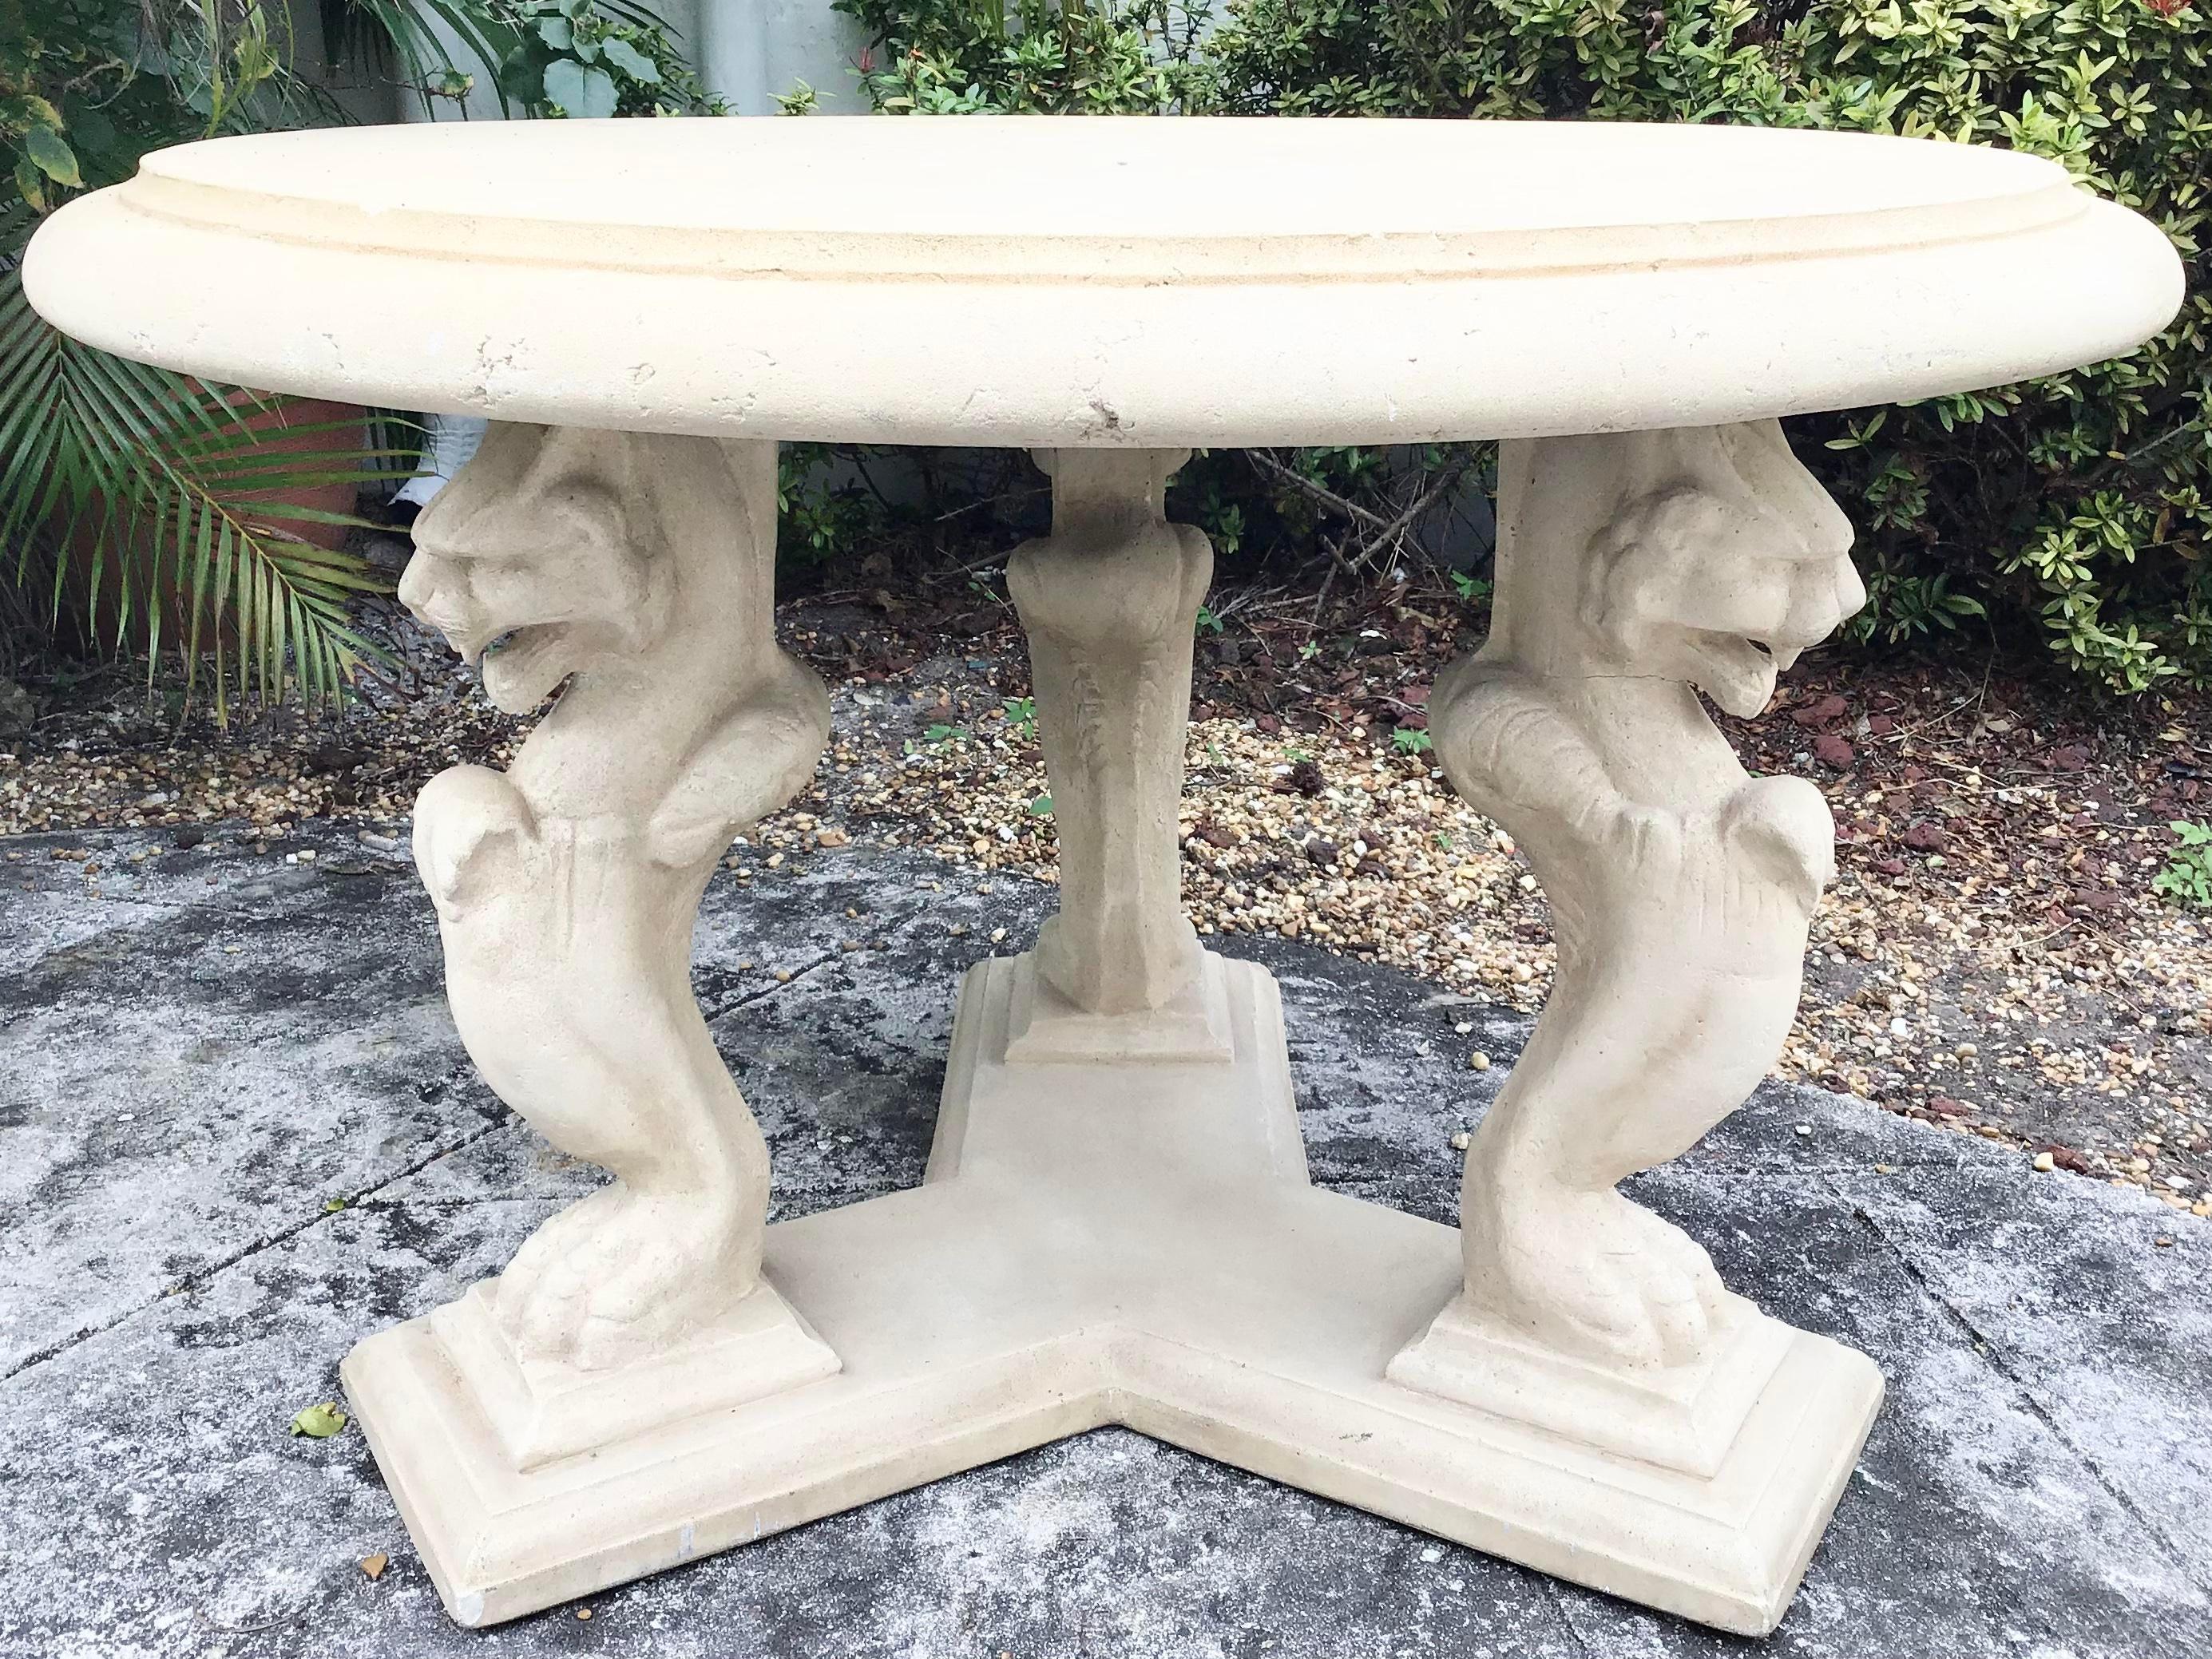 Beautiful round stone patio table with a nicely carved pedestal base. Add some elegance to your patio area with this Classical design.